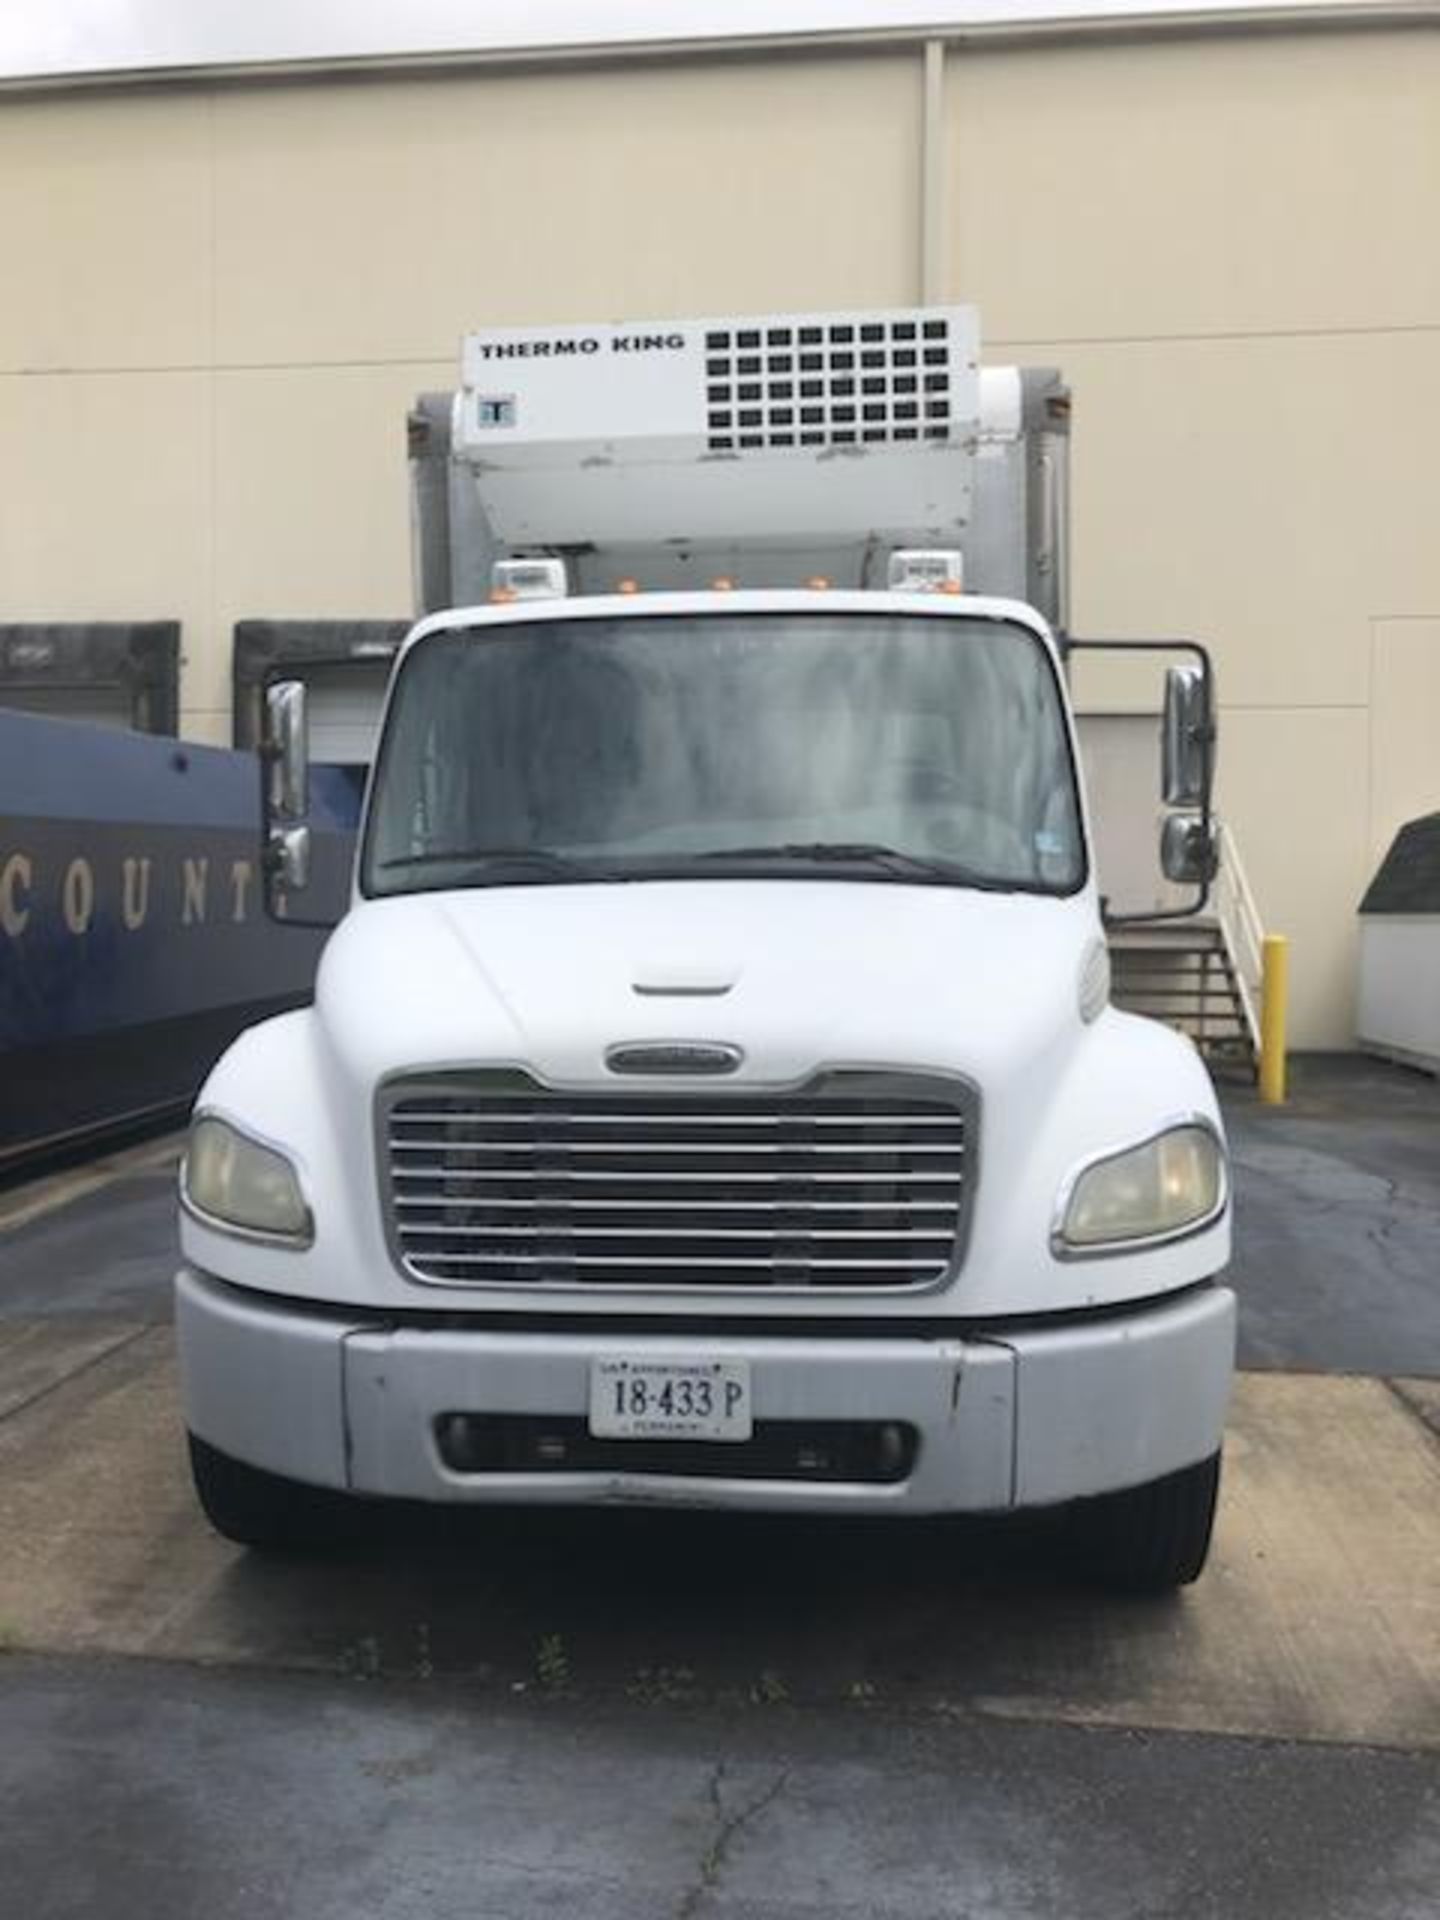 2003 Freightliner Refrigerated Box Truck, Dead Battery, Mileage Not Available, VIN 1FVACXCS53HM03158 - Image 4 of 6